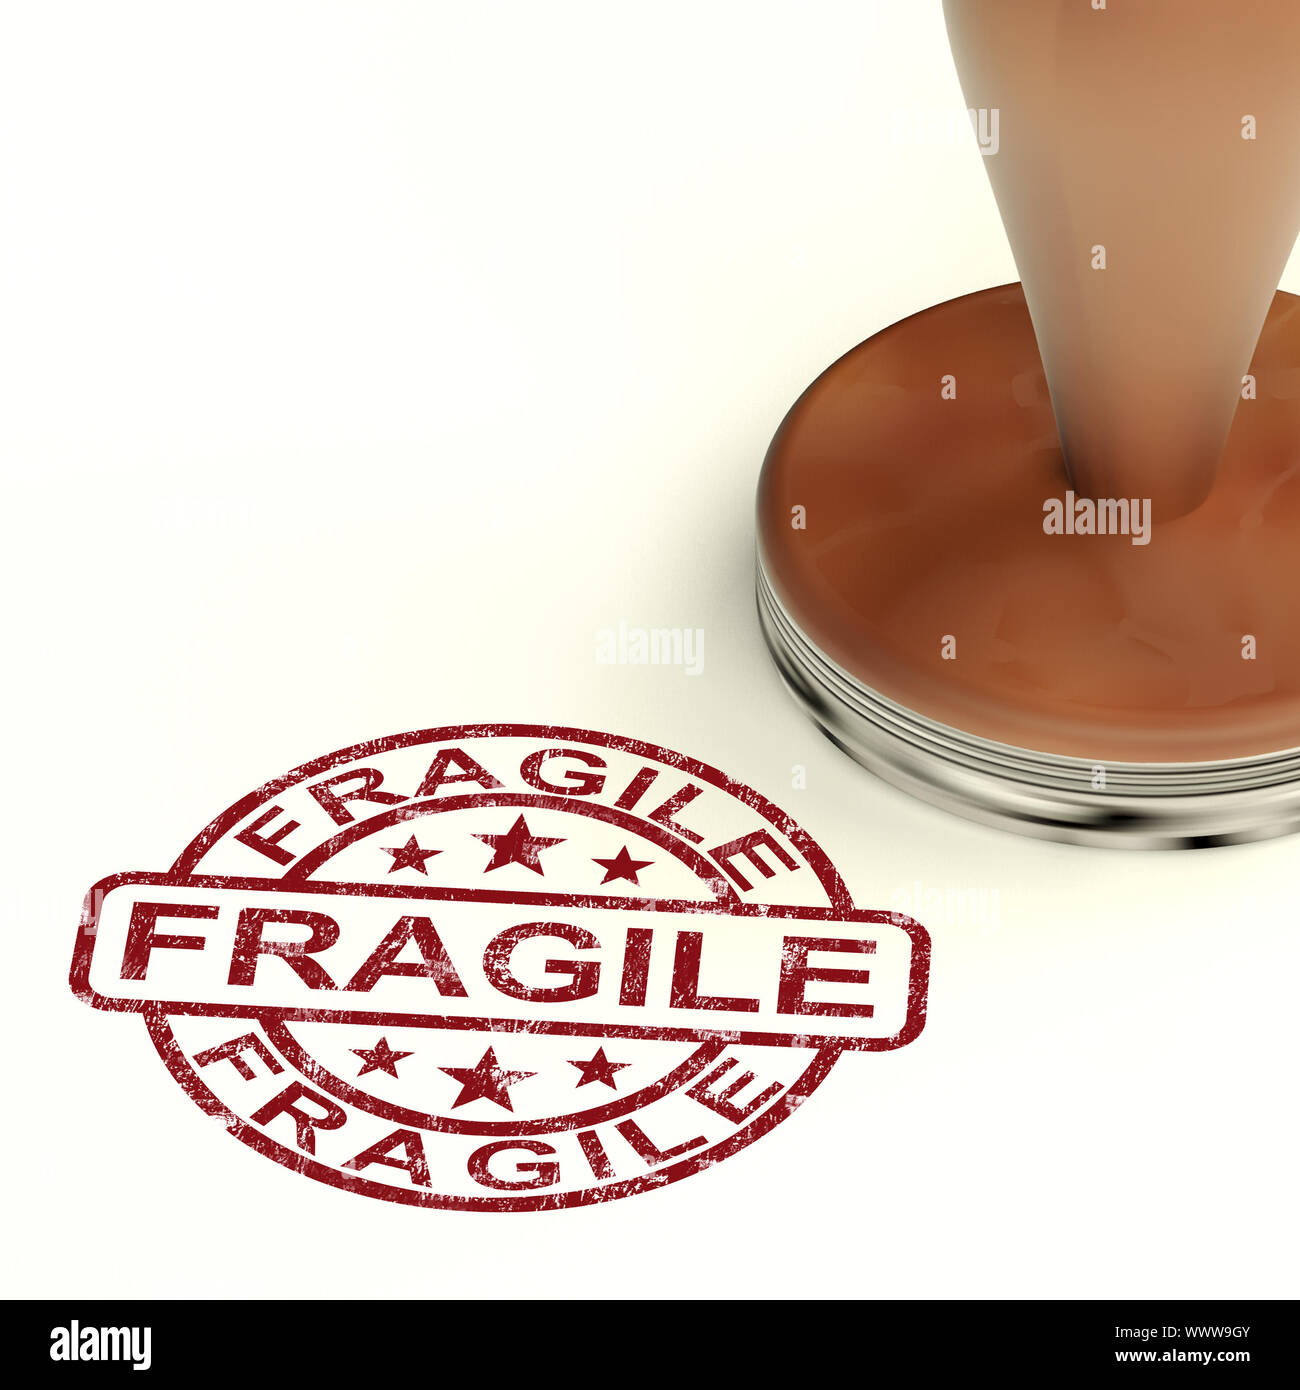 Fragile Stamp Shows Breakable Products For Delivery Stock Photo